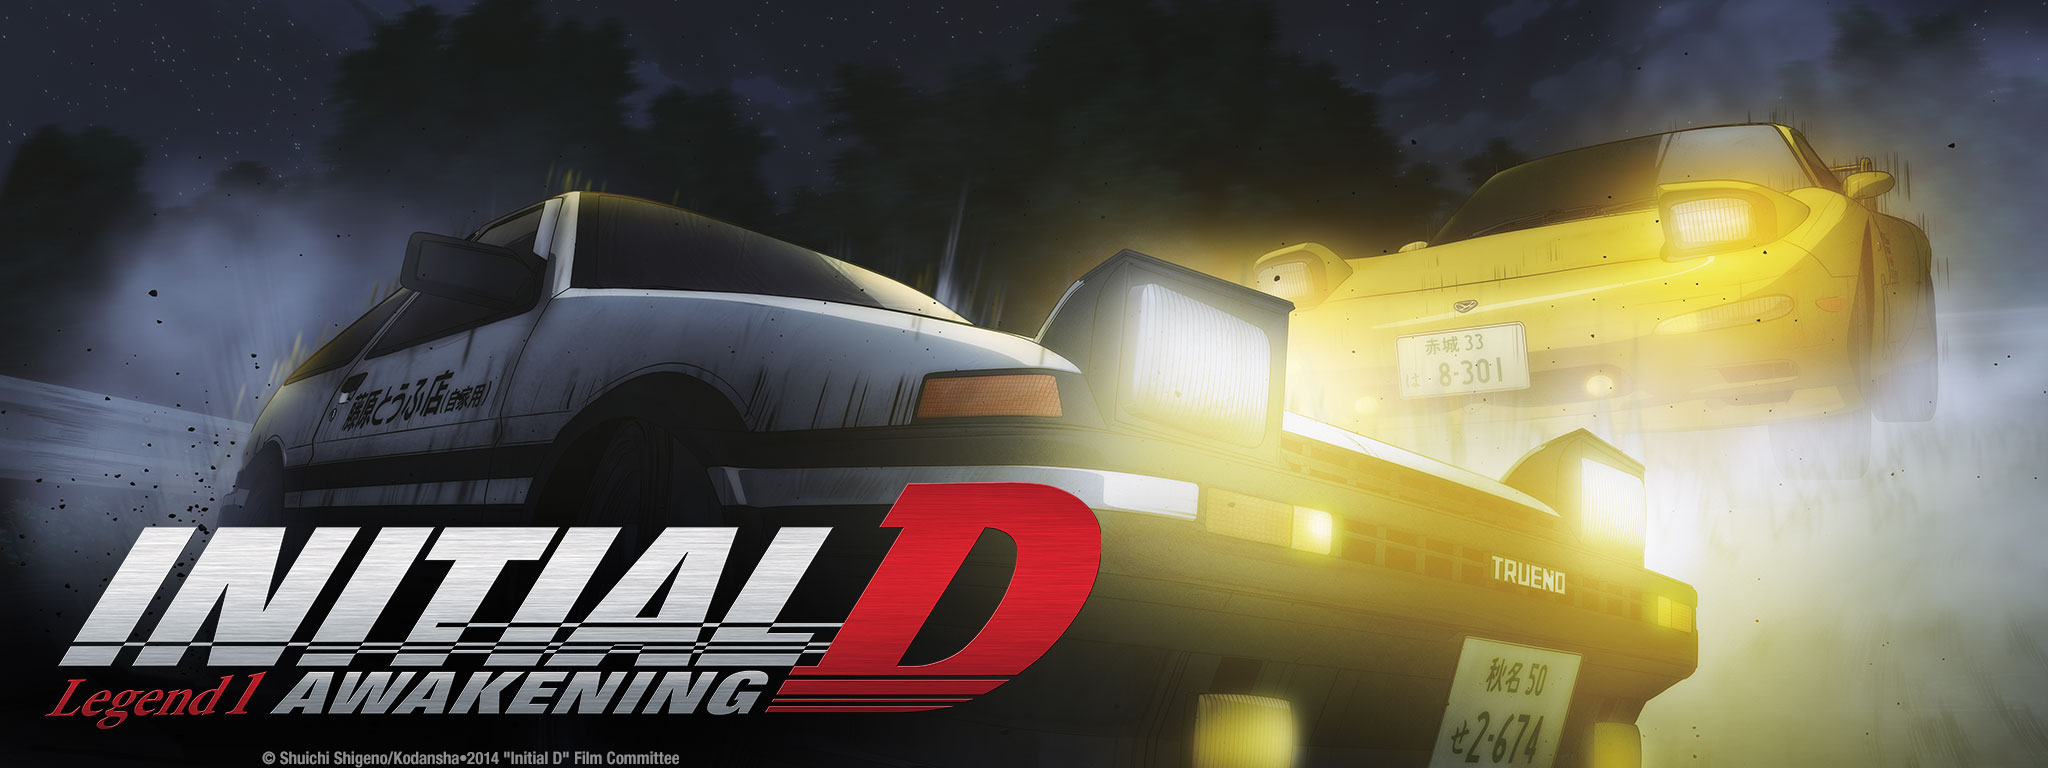 Title Art for New Theatrical Movie Initial D Legend 1: Awakening